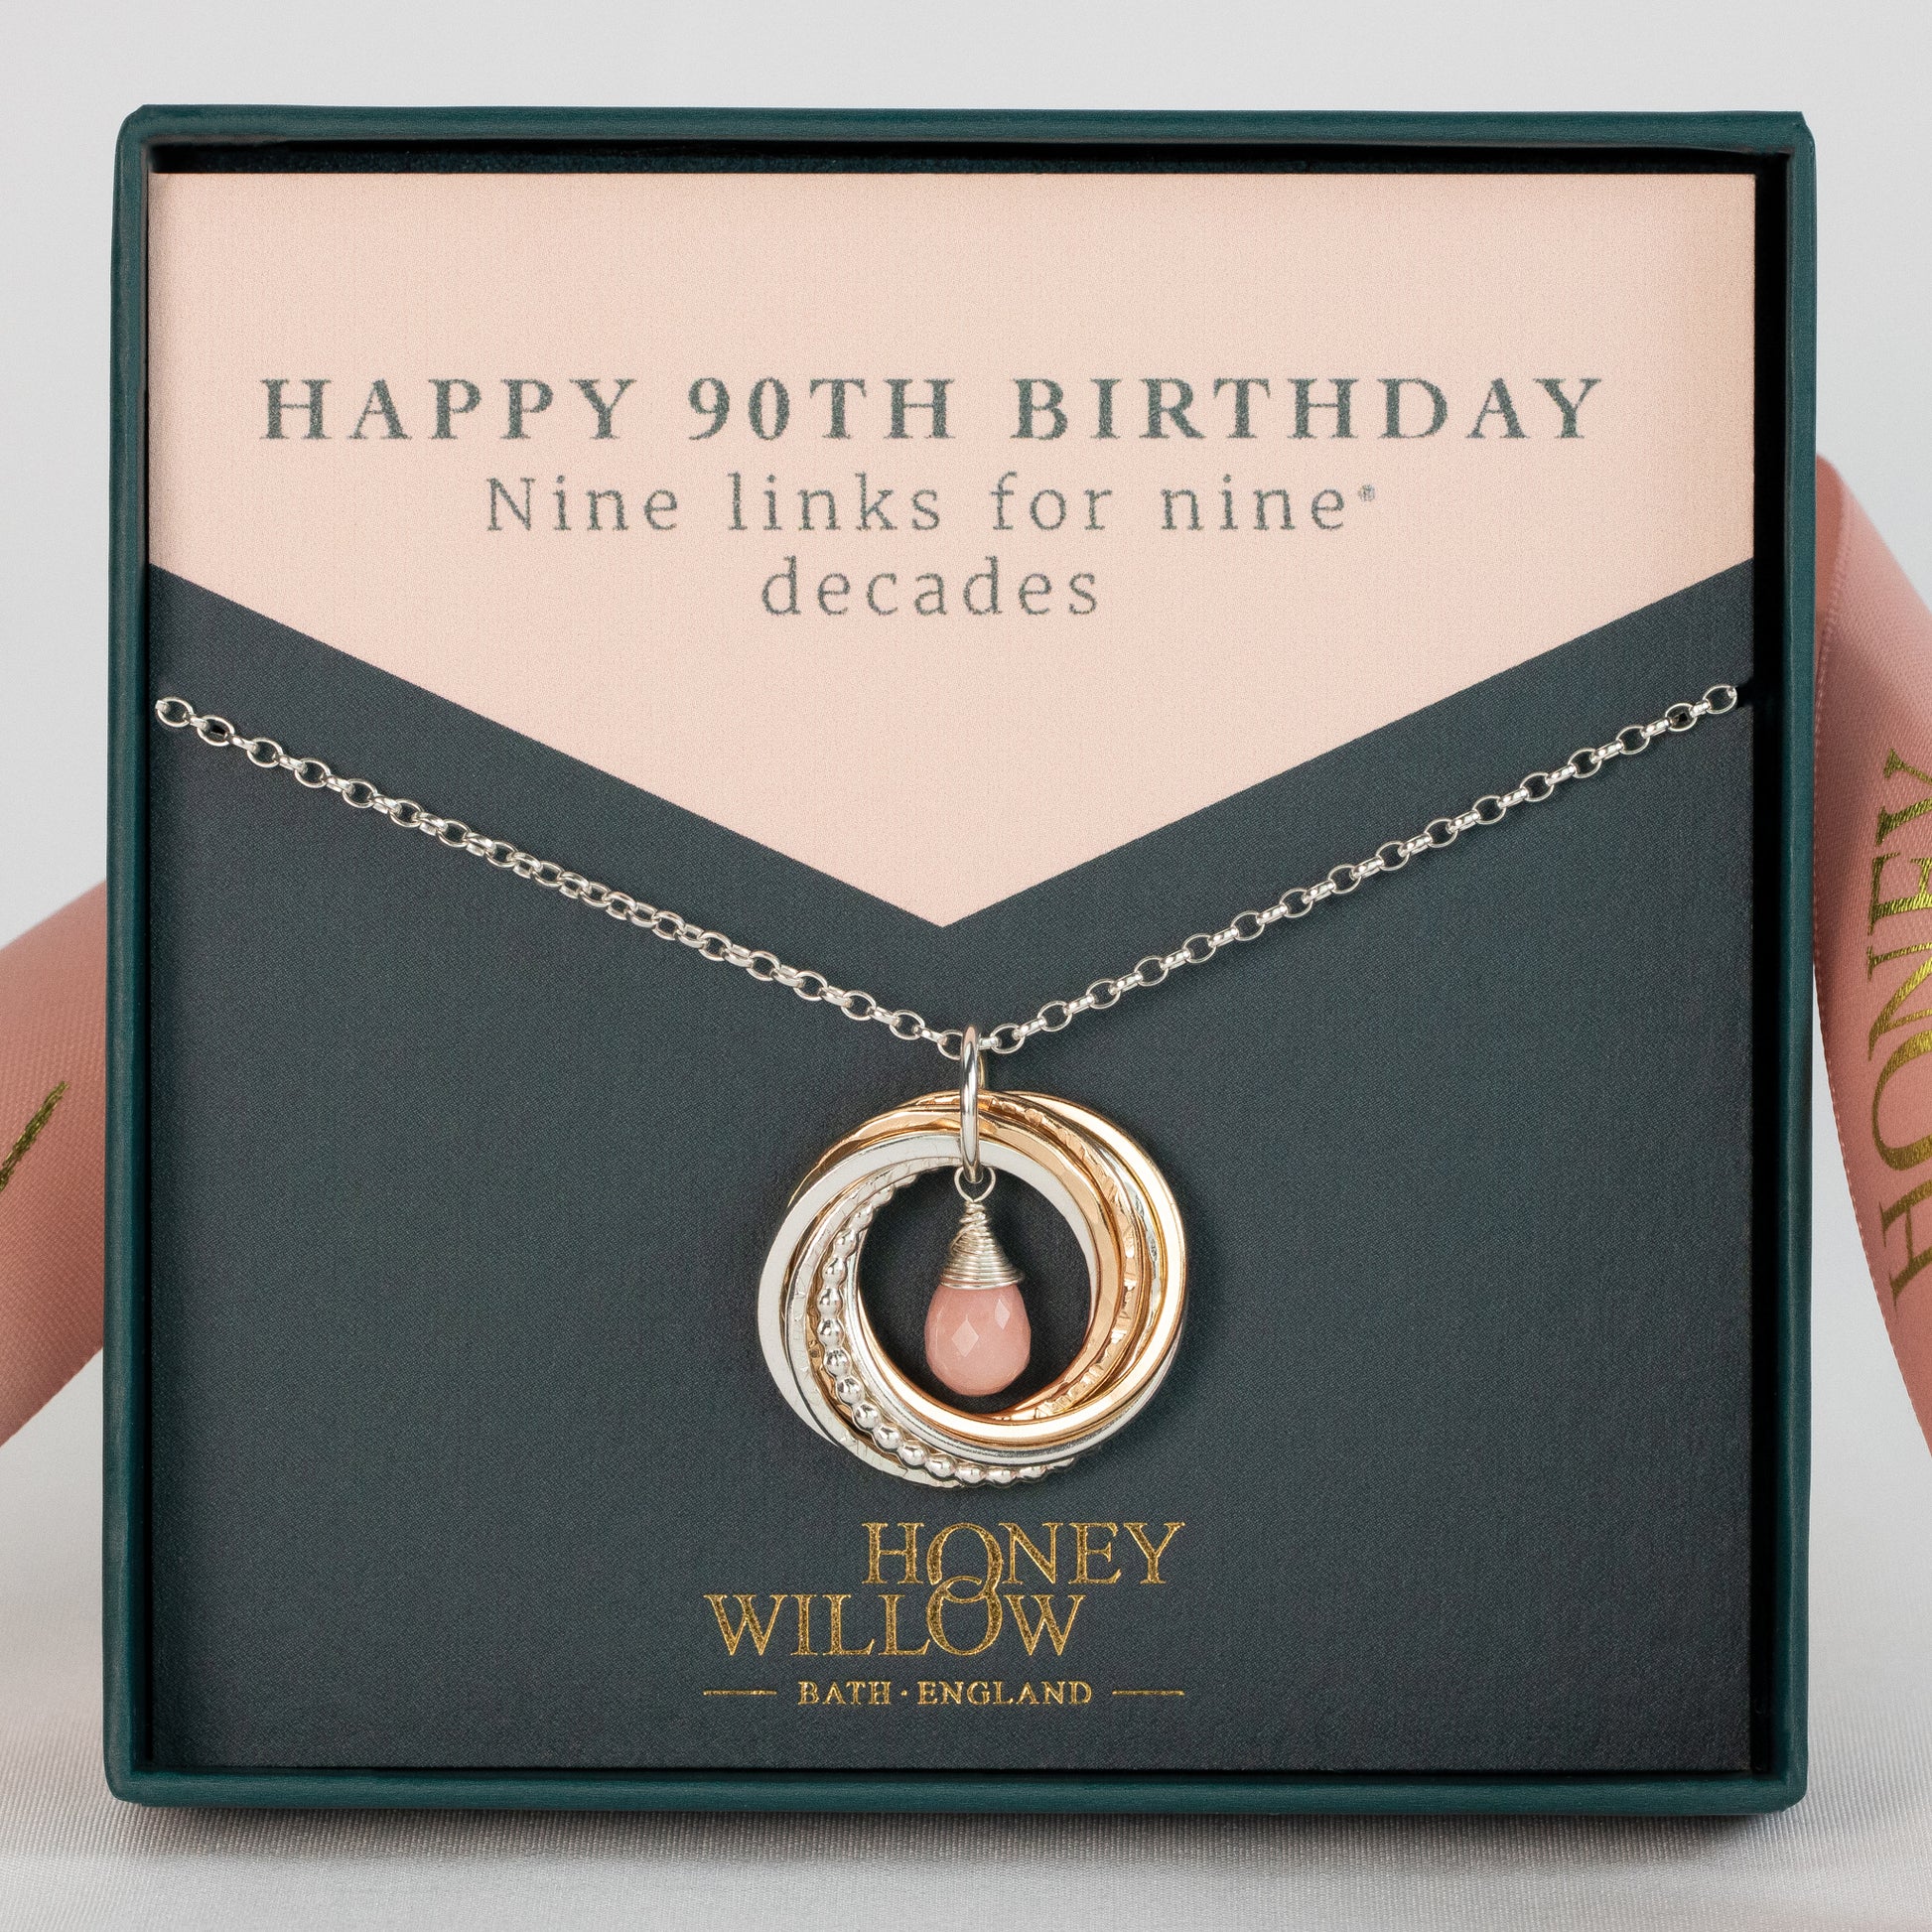 90th Birthday Birthstone Necklace - The Original 9 Links for 9 Decades Necklace - Silver & Gold